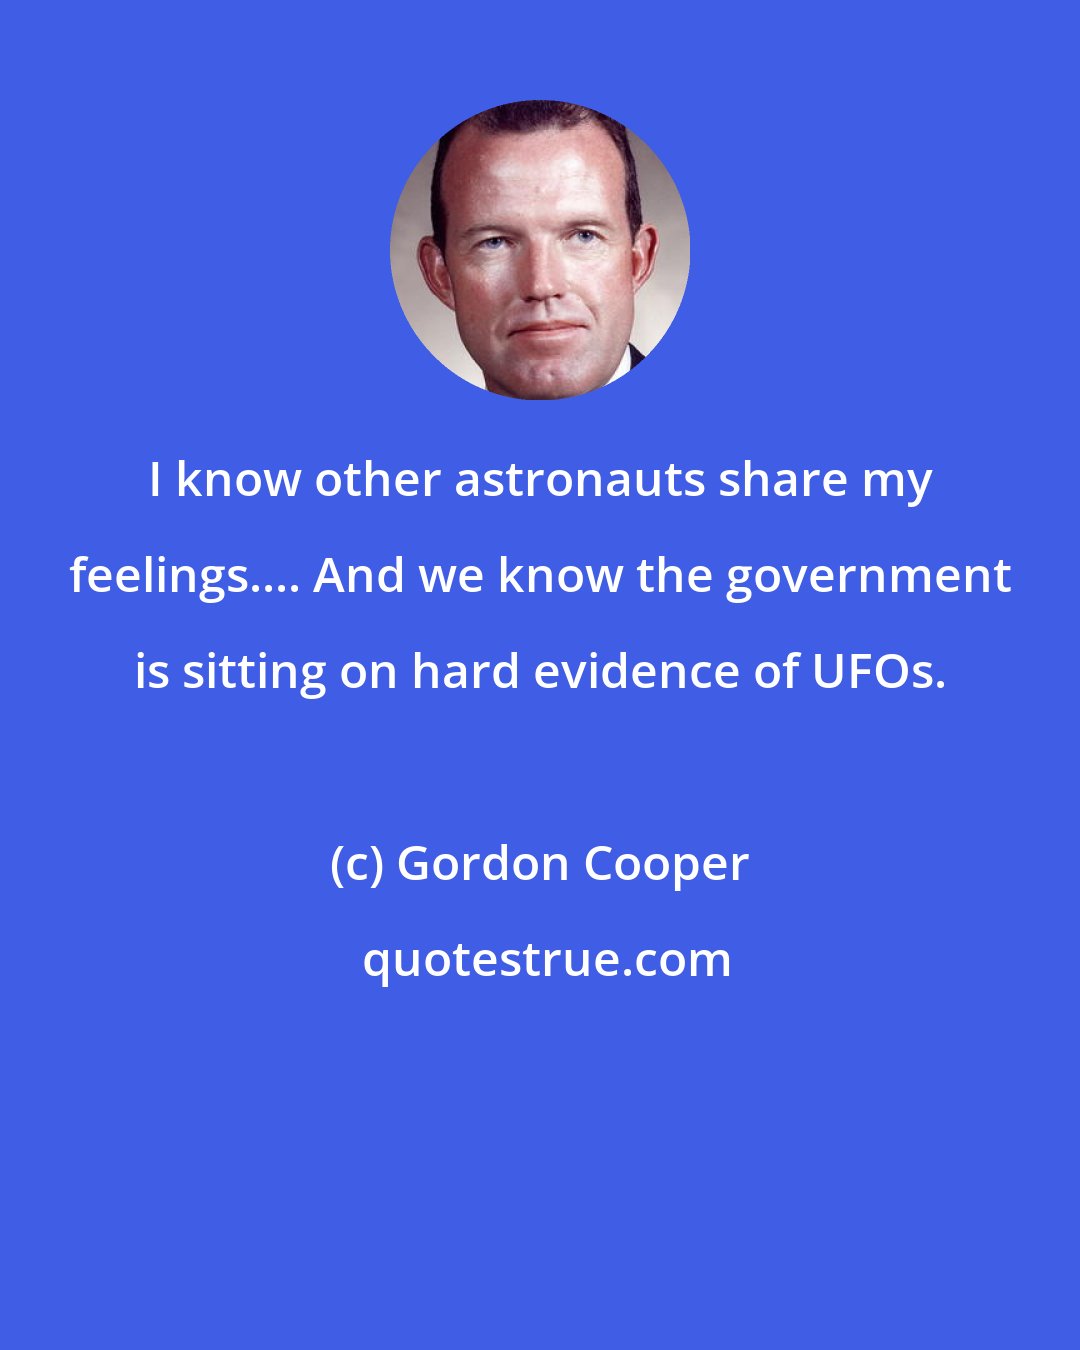 Gordon Cooper: I know other astronauts share my feelings.... And we know the government is sitting on hard evidence of UFOs.